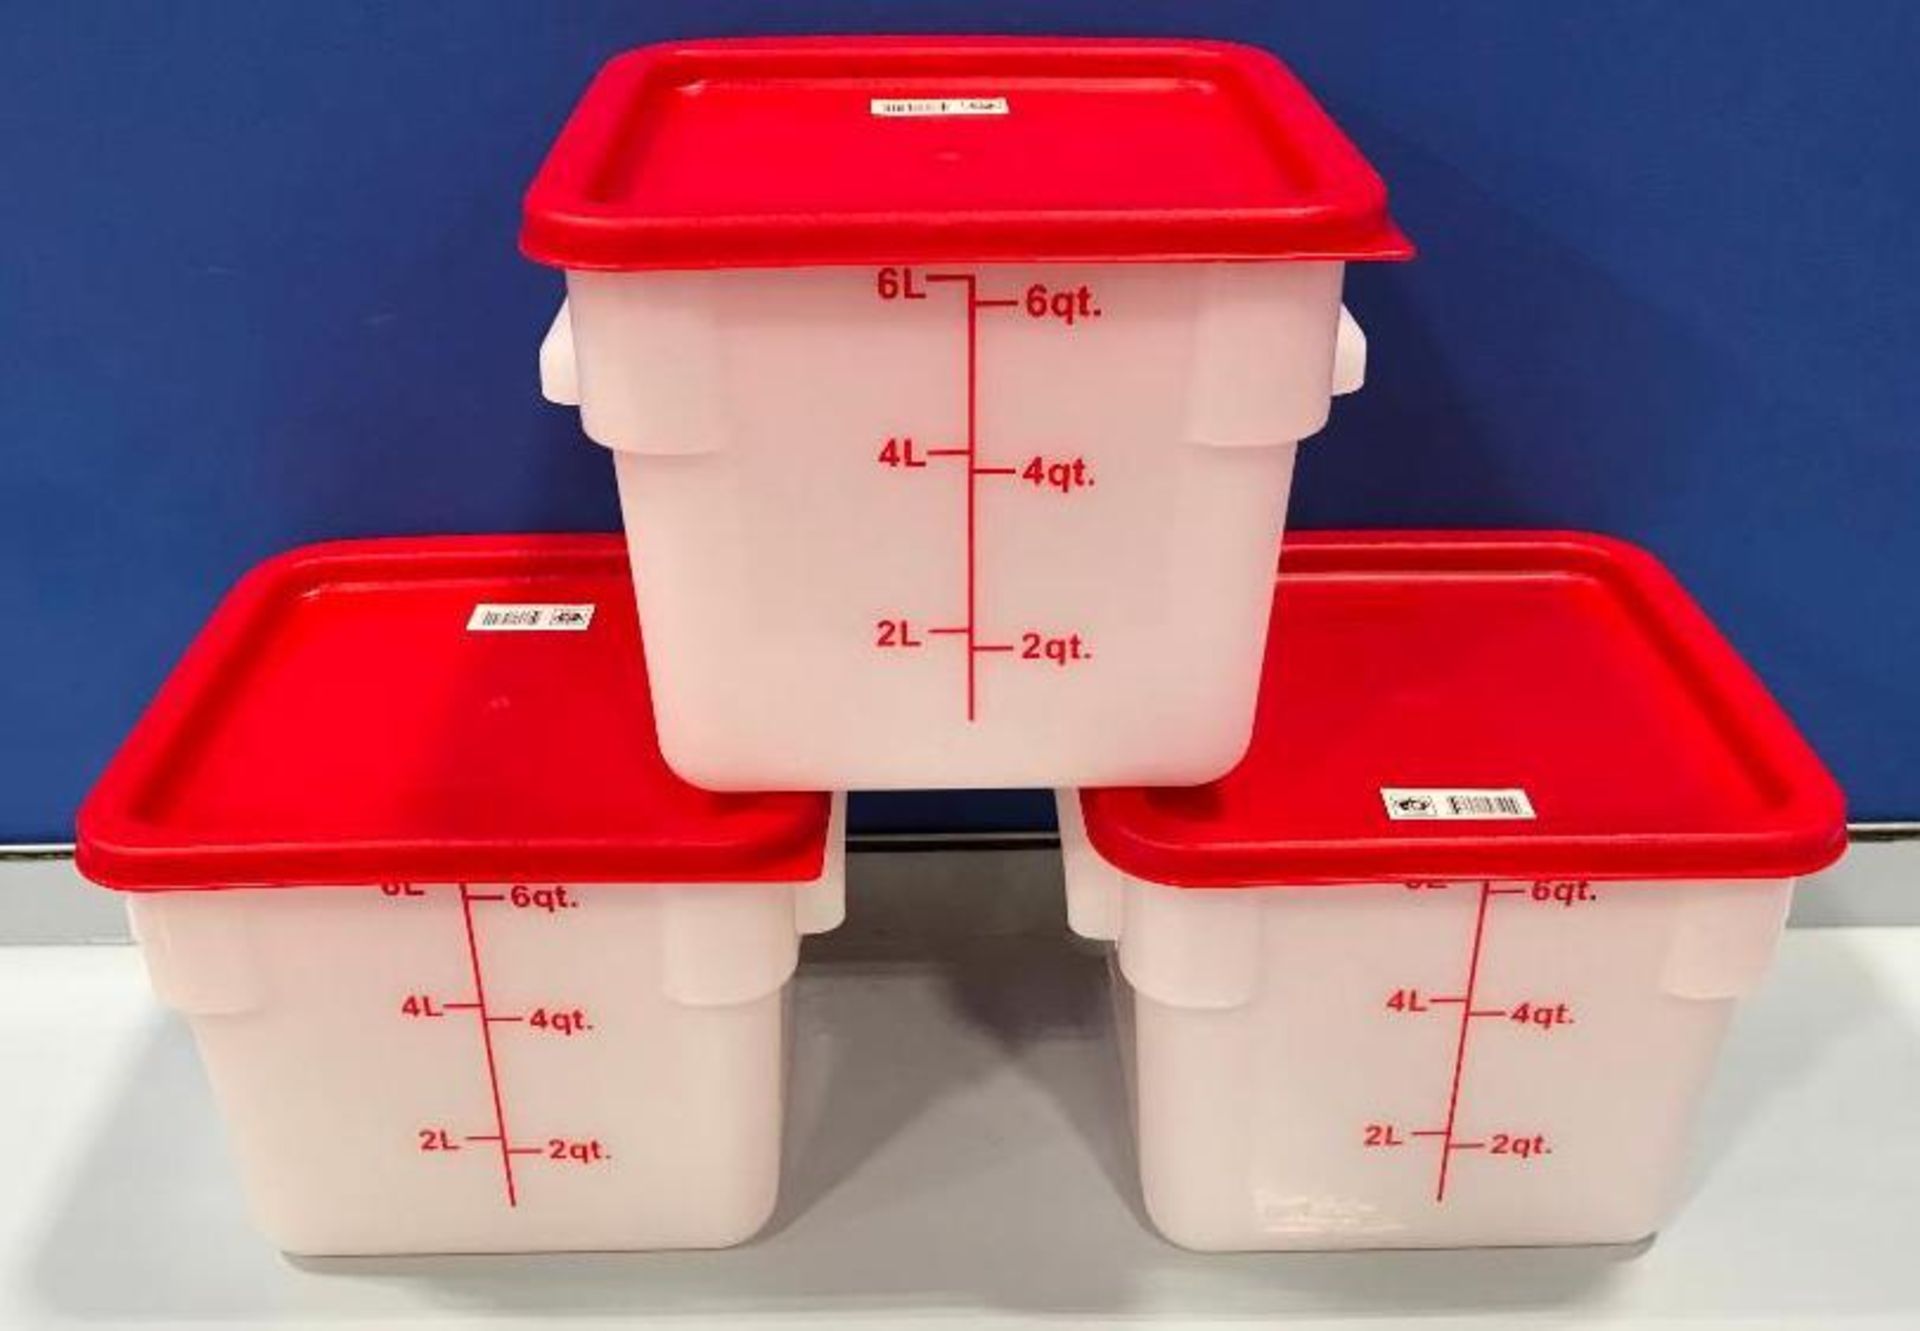 6QT SQUARE WHITE FOOD STORAGE CONTAINER, JOHNSON ROSE 56106 - LOT OF 3 - NEW